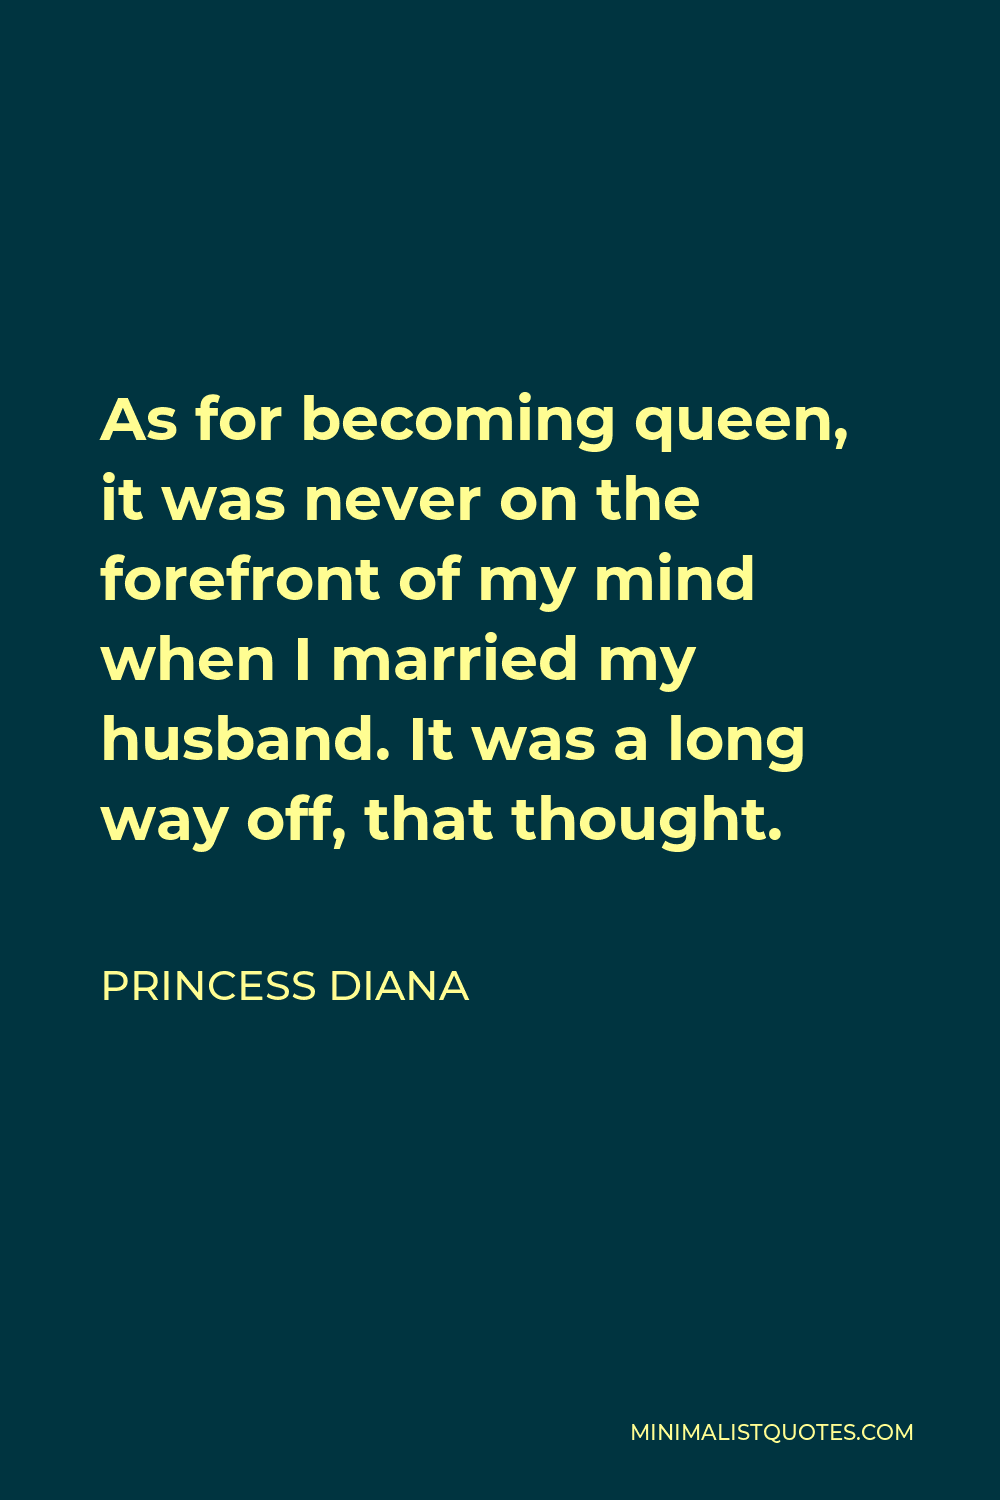 Princess Diana Quote - As for becoming queen, it was never on the forefront of my mind when I married my husband. It was a long way off, that thought.